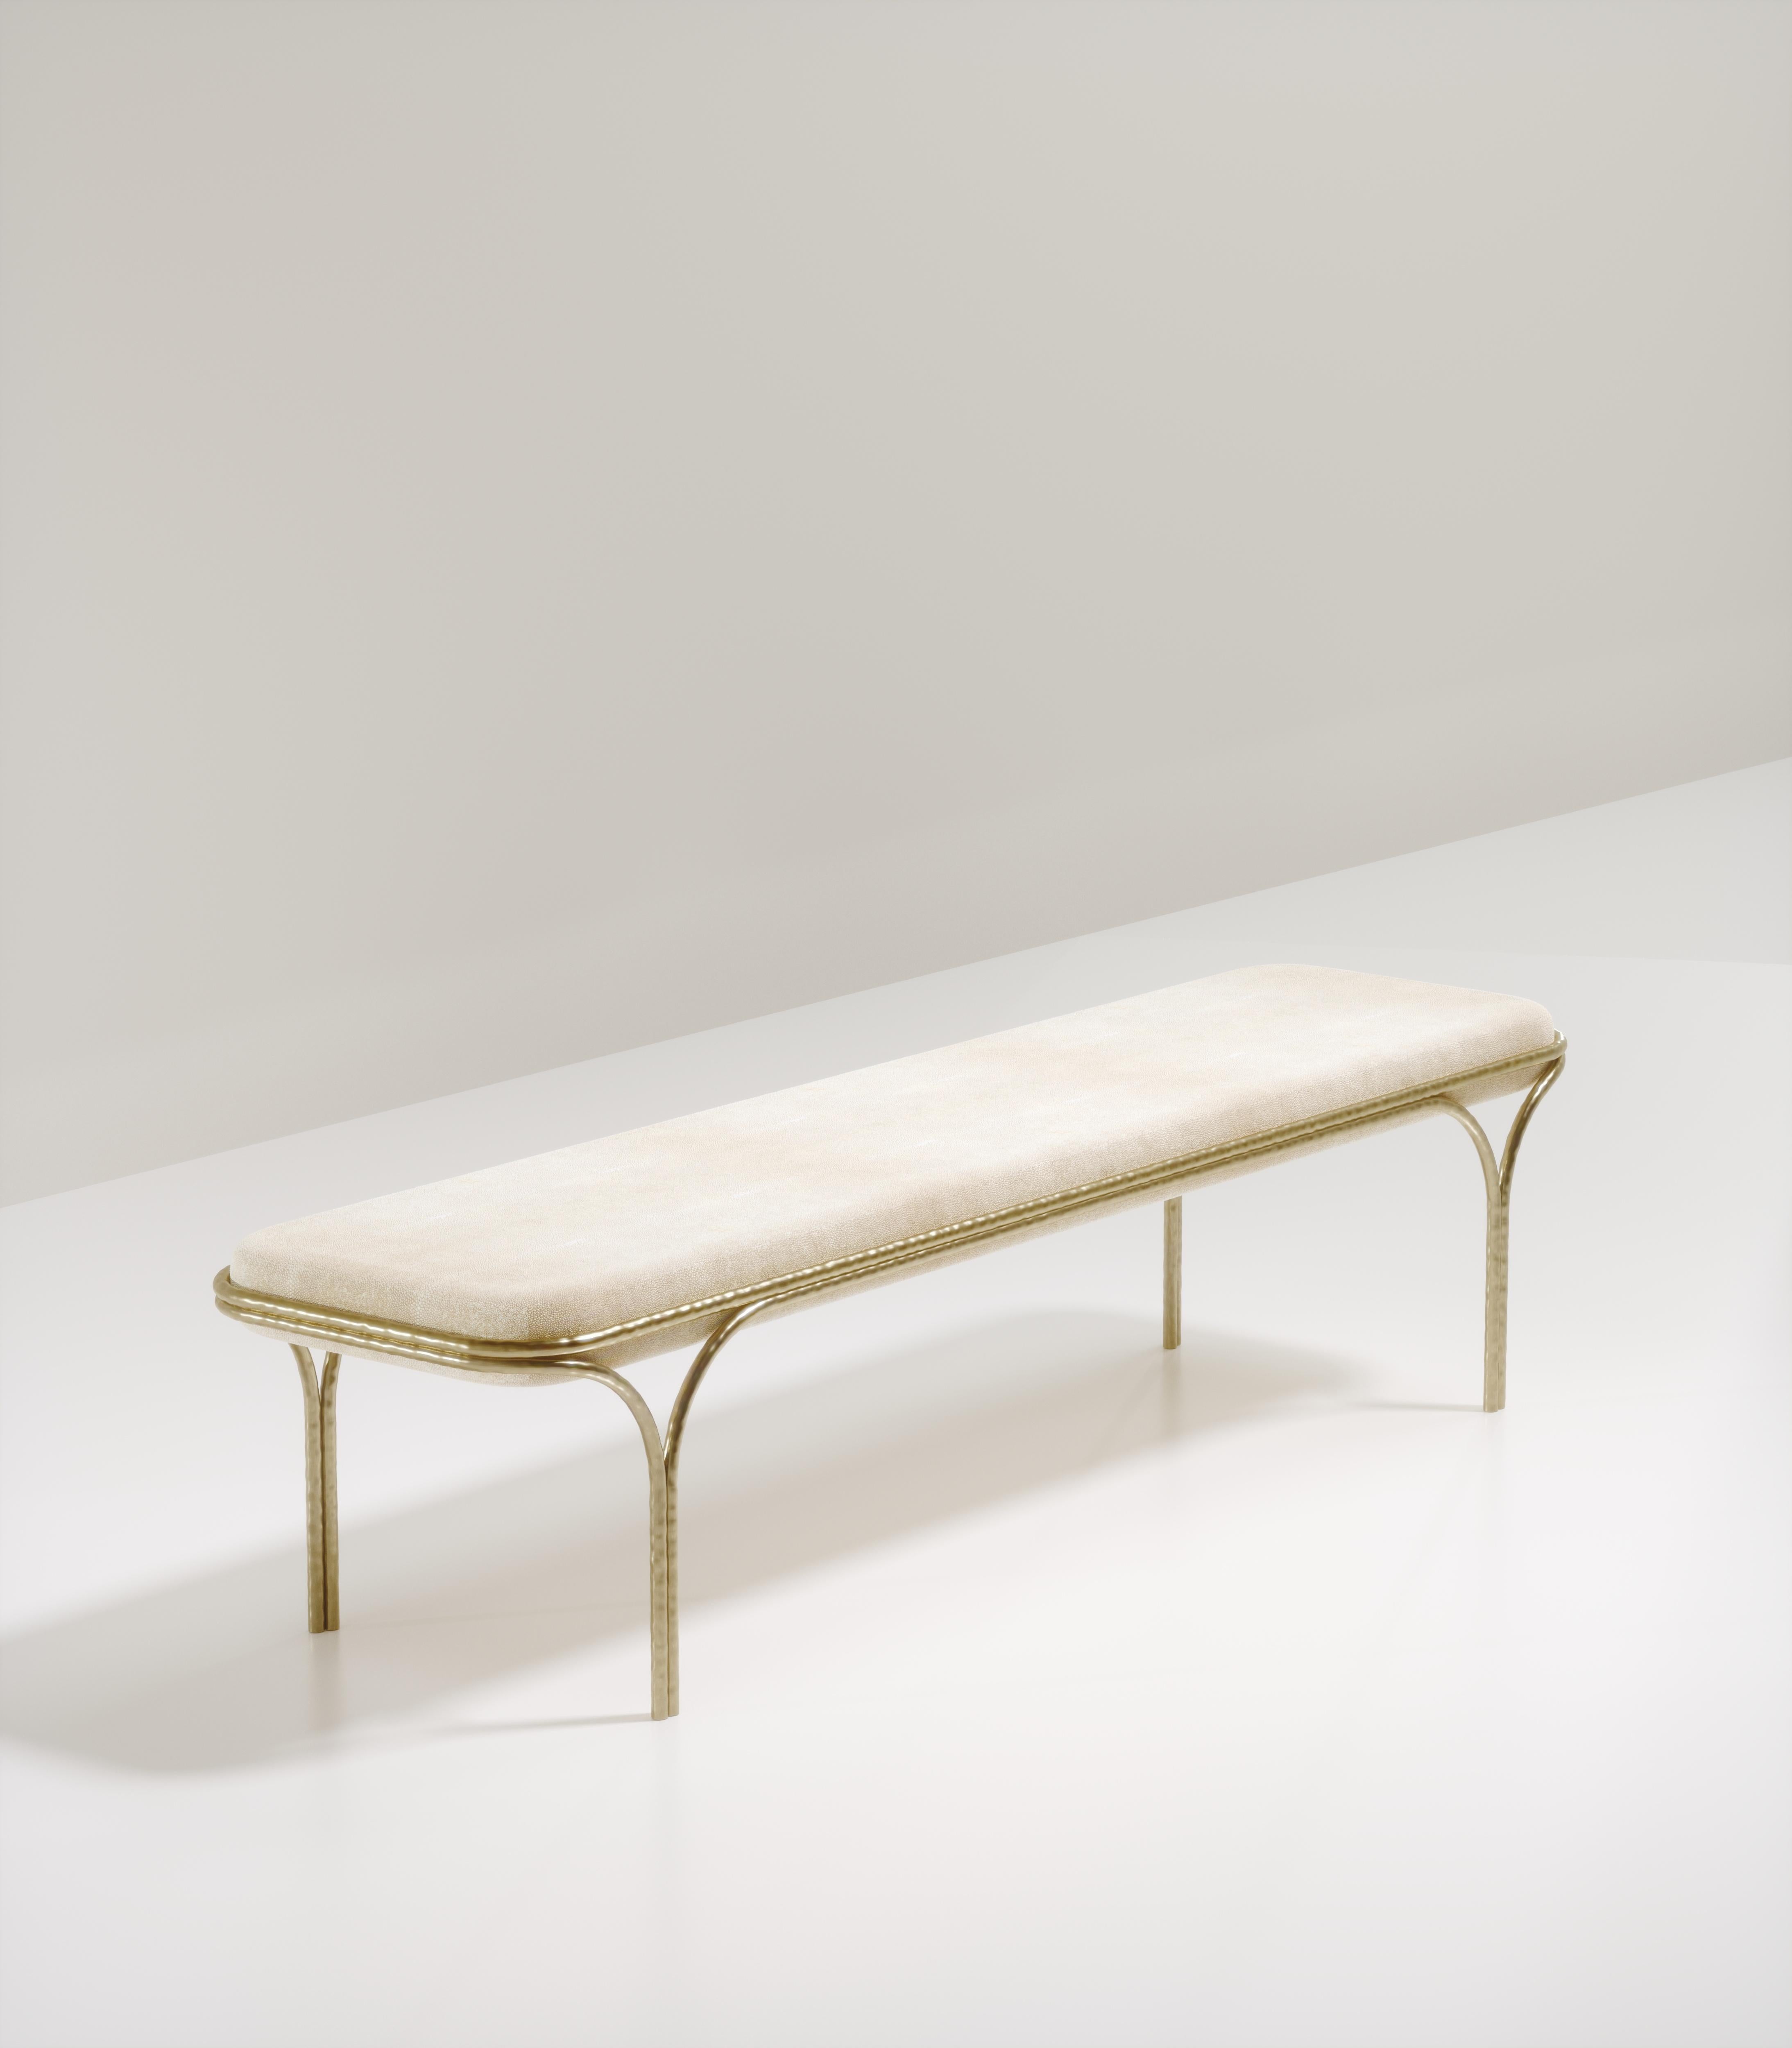 The Arianne Bench by R&Y Augousti is an elegant piece for any space. The cream shagreen seat, with curved edges, sits on an organic bronze-patina frame. The intricate frame and legs have a 